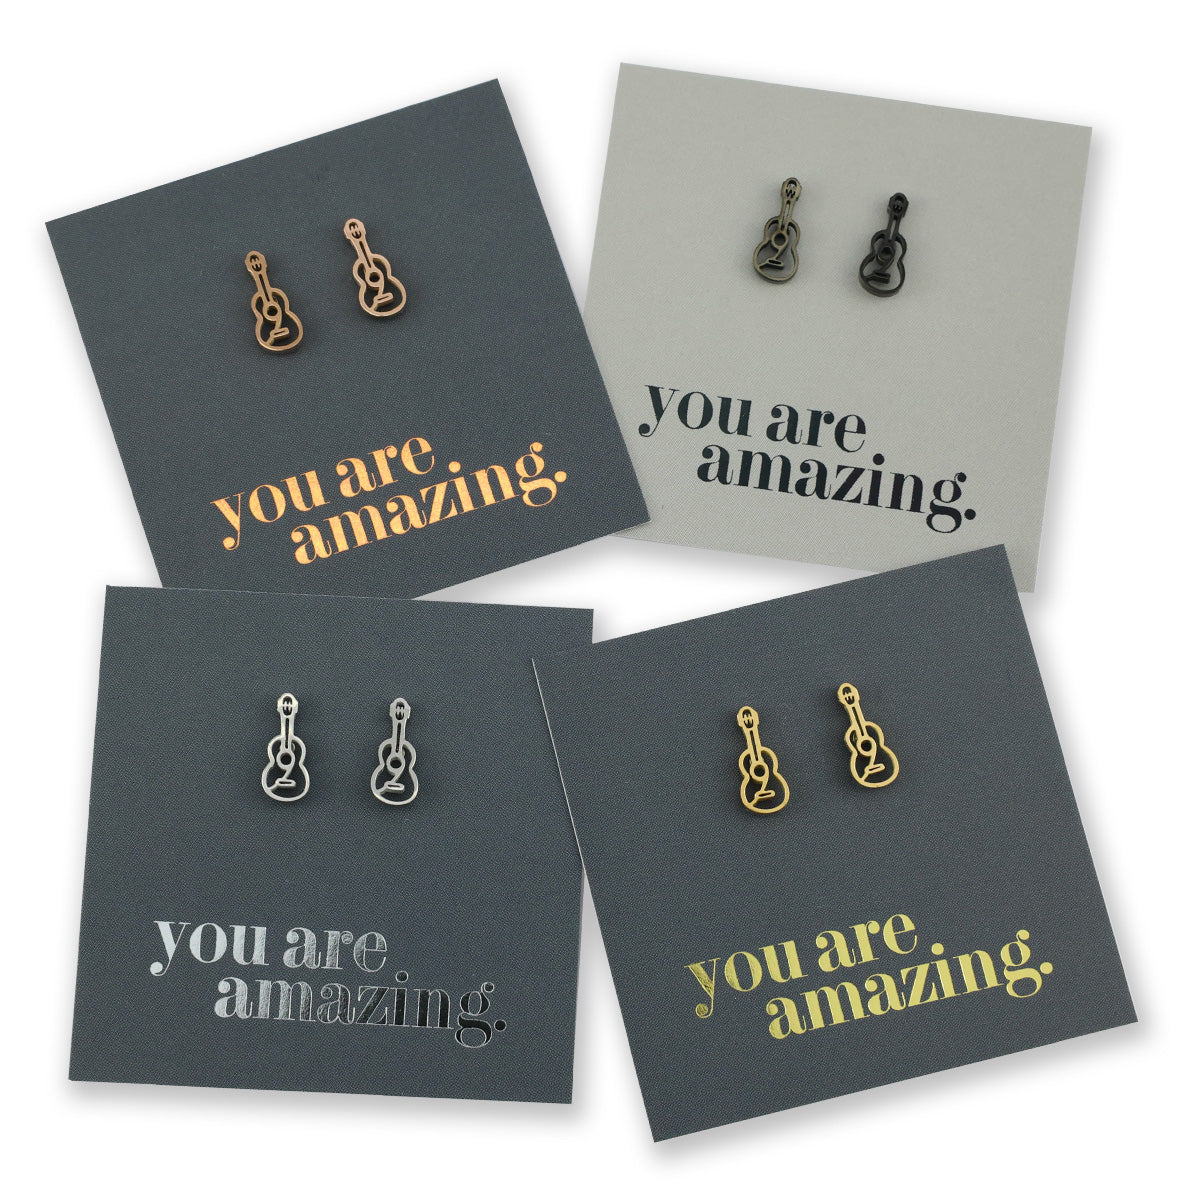 Stainless Steel Earring Studs - You Are Amazing - ACOUSTIC GUITARS